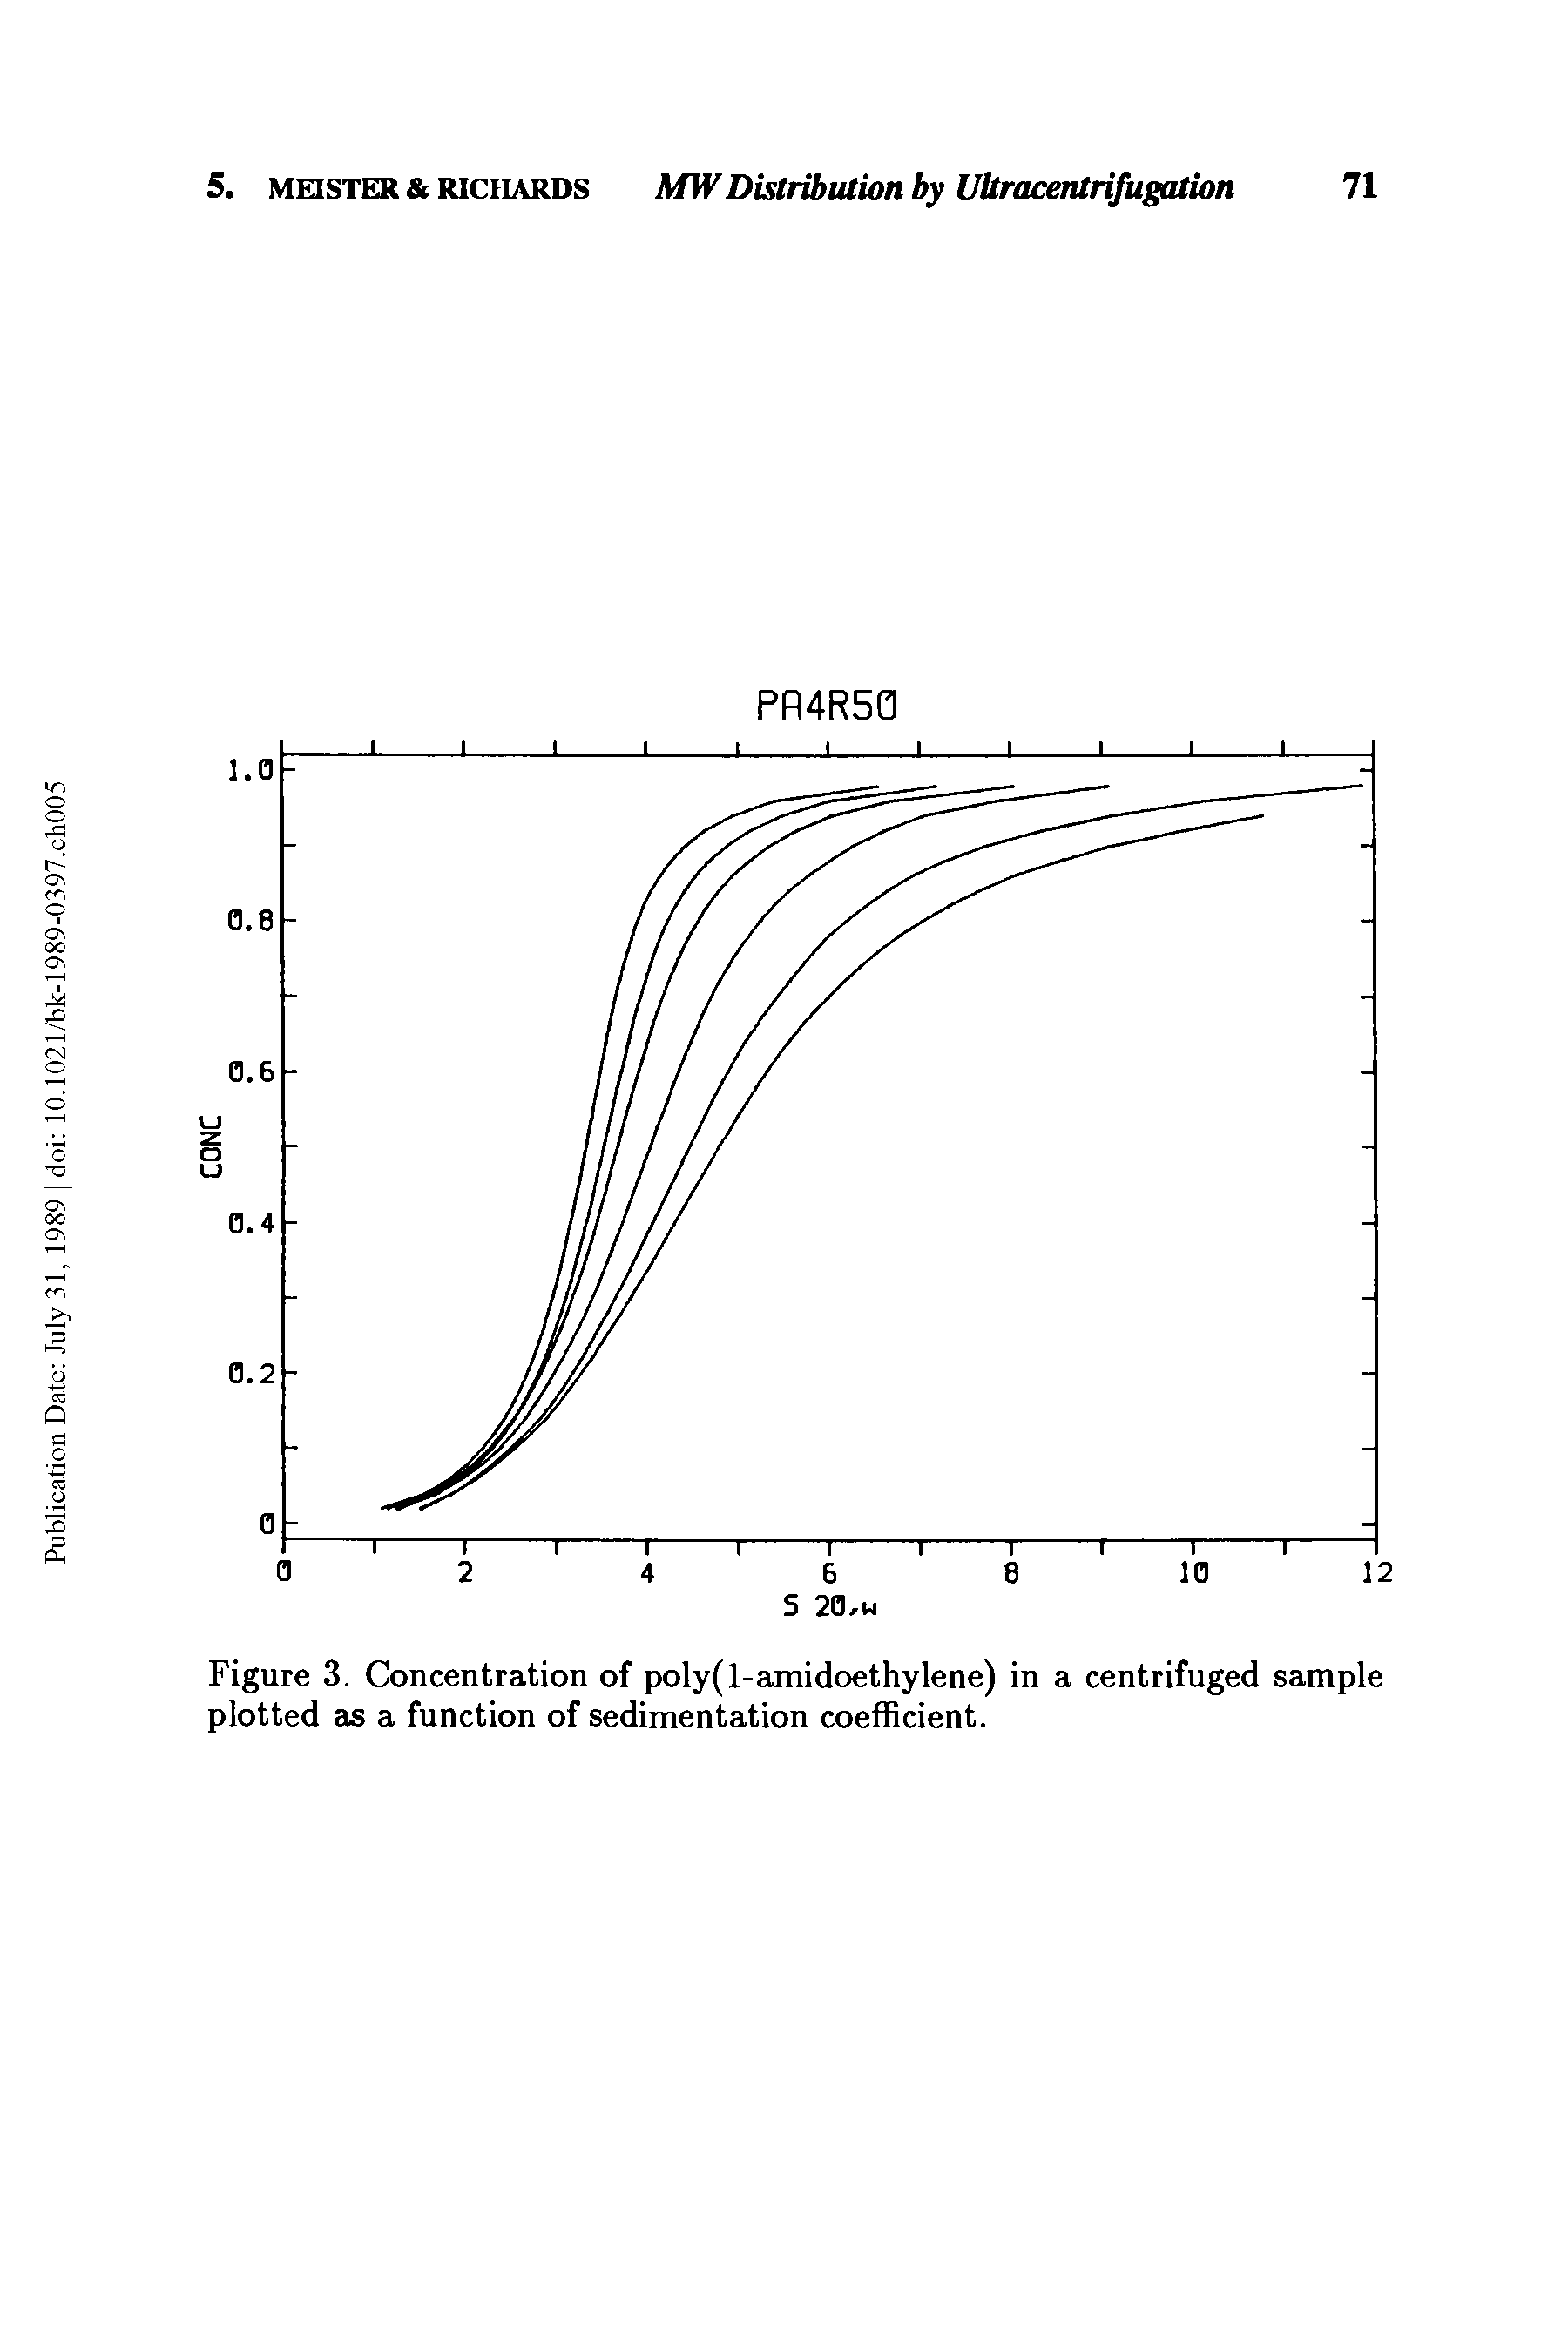 Figure 3. Concentration of poly(l-amidoethylene) in a centrifuged sample plotted as a function of sedimentation coefficient.